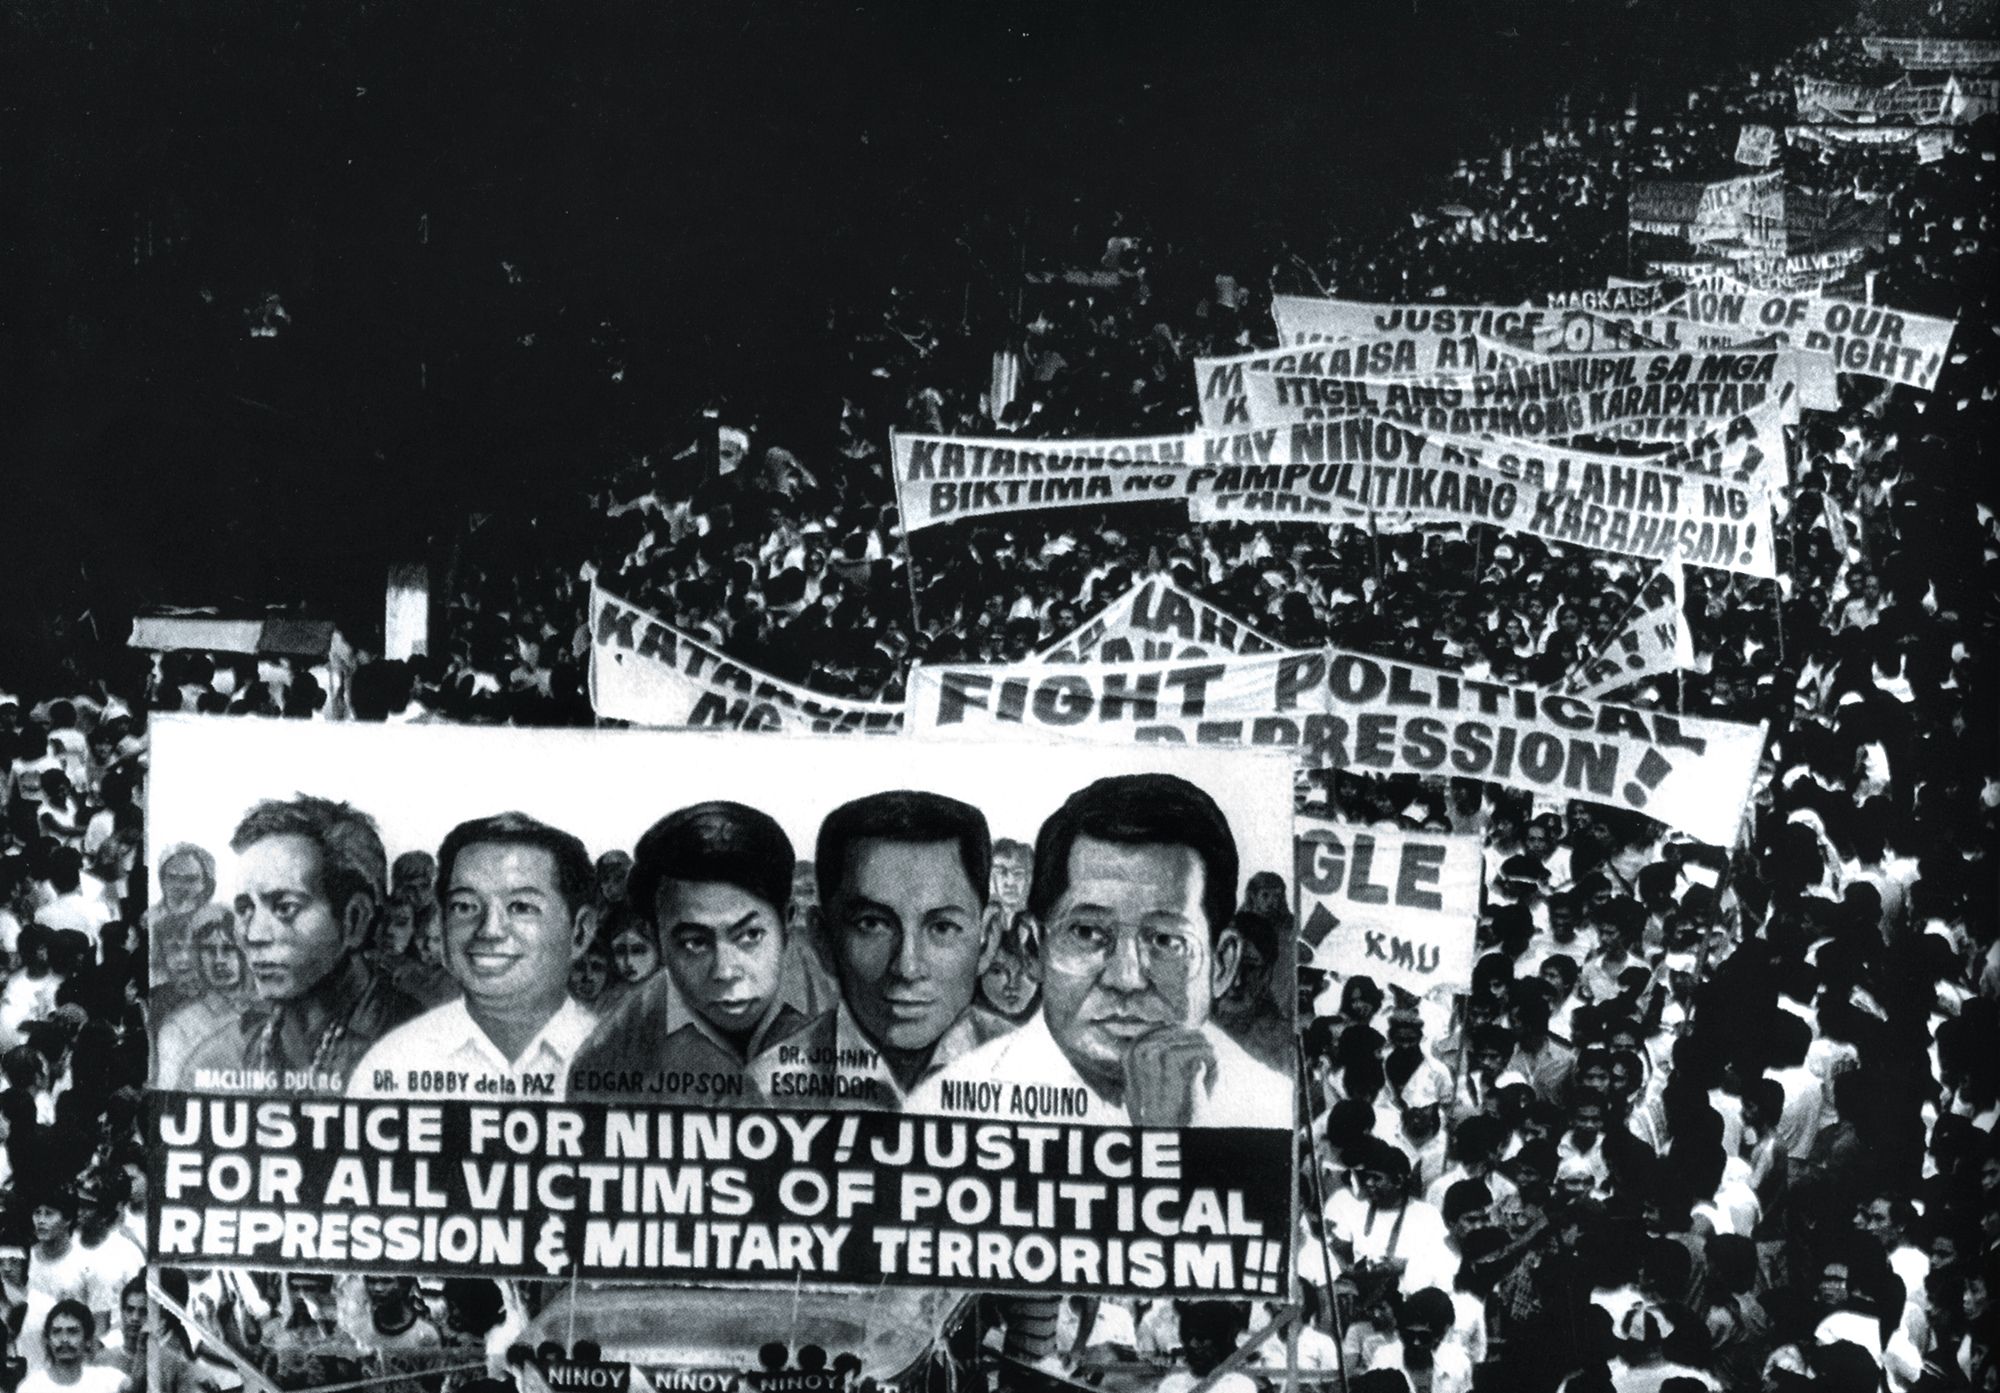 EDSA Revolution: A Look Back At The Historic 1986 People Power